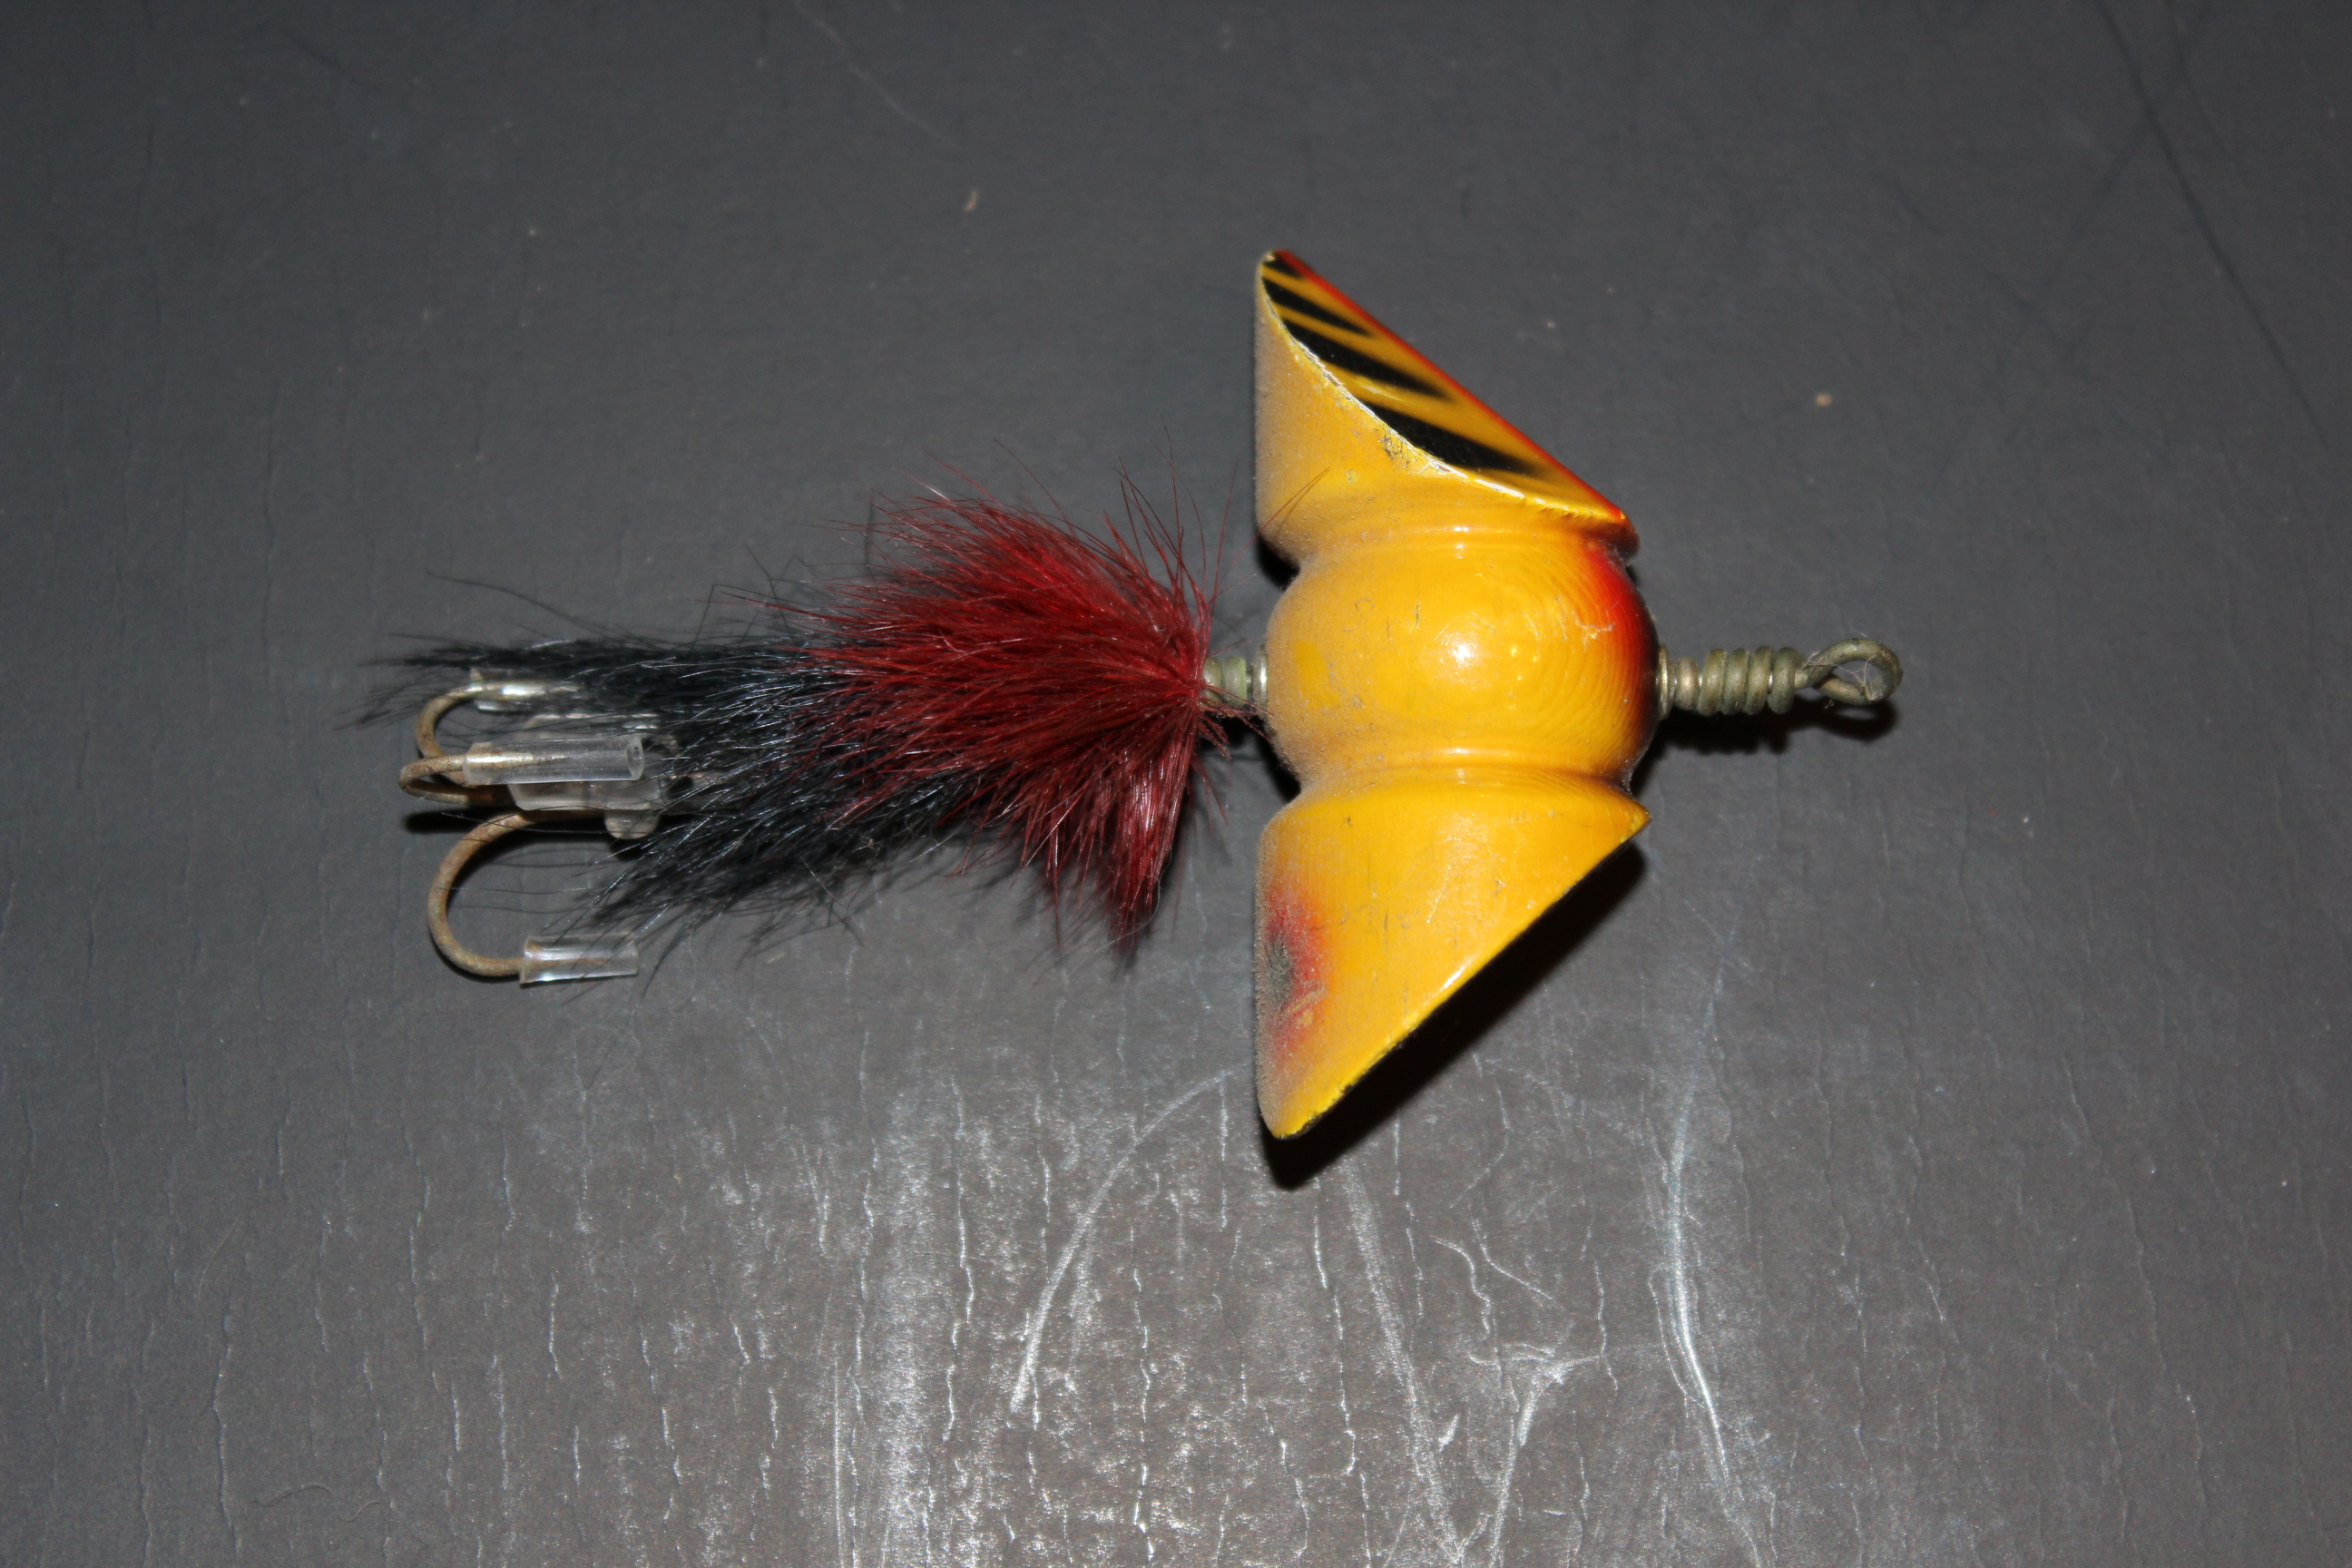 South Bend Lures – Old Indiana Lures